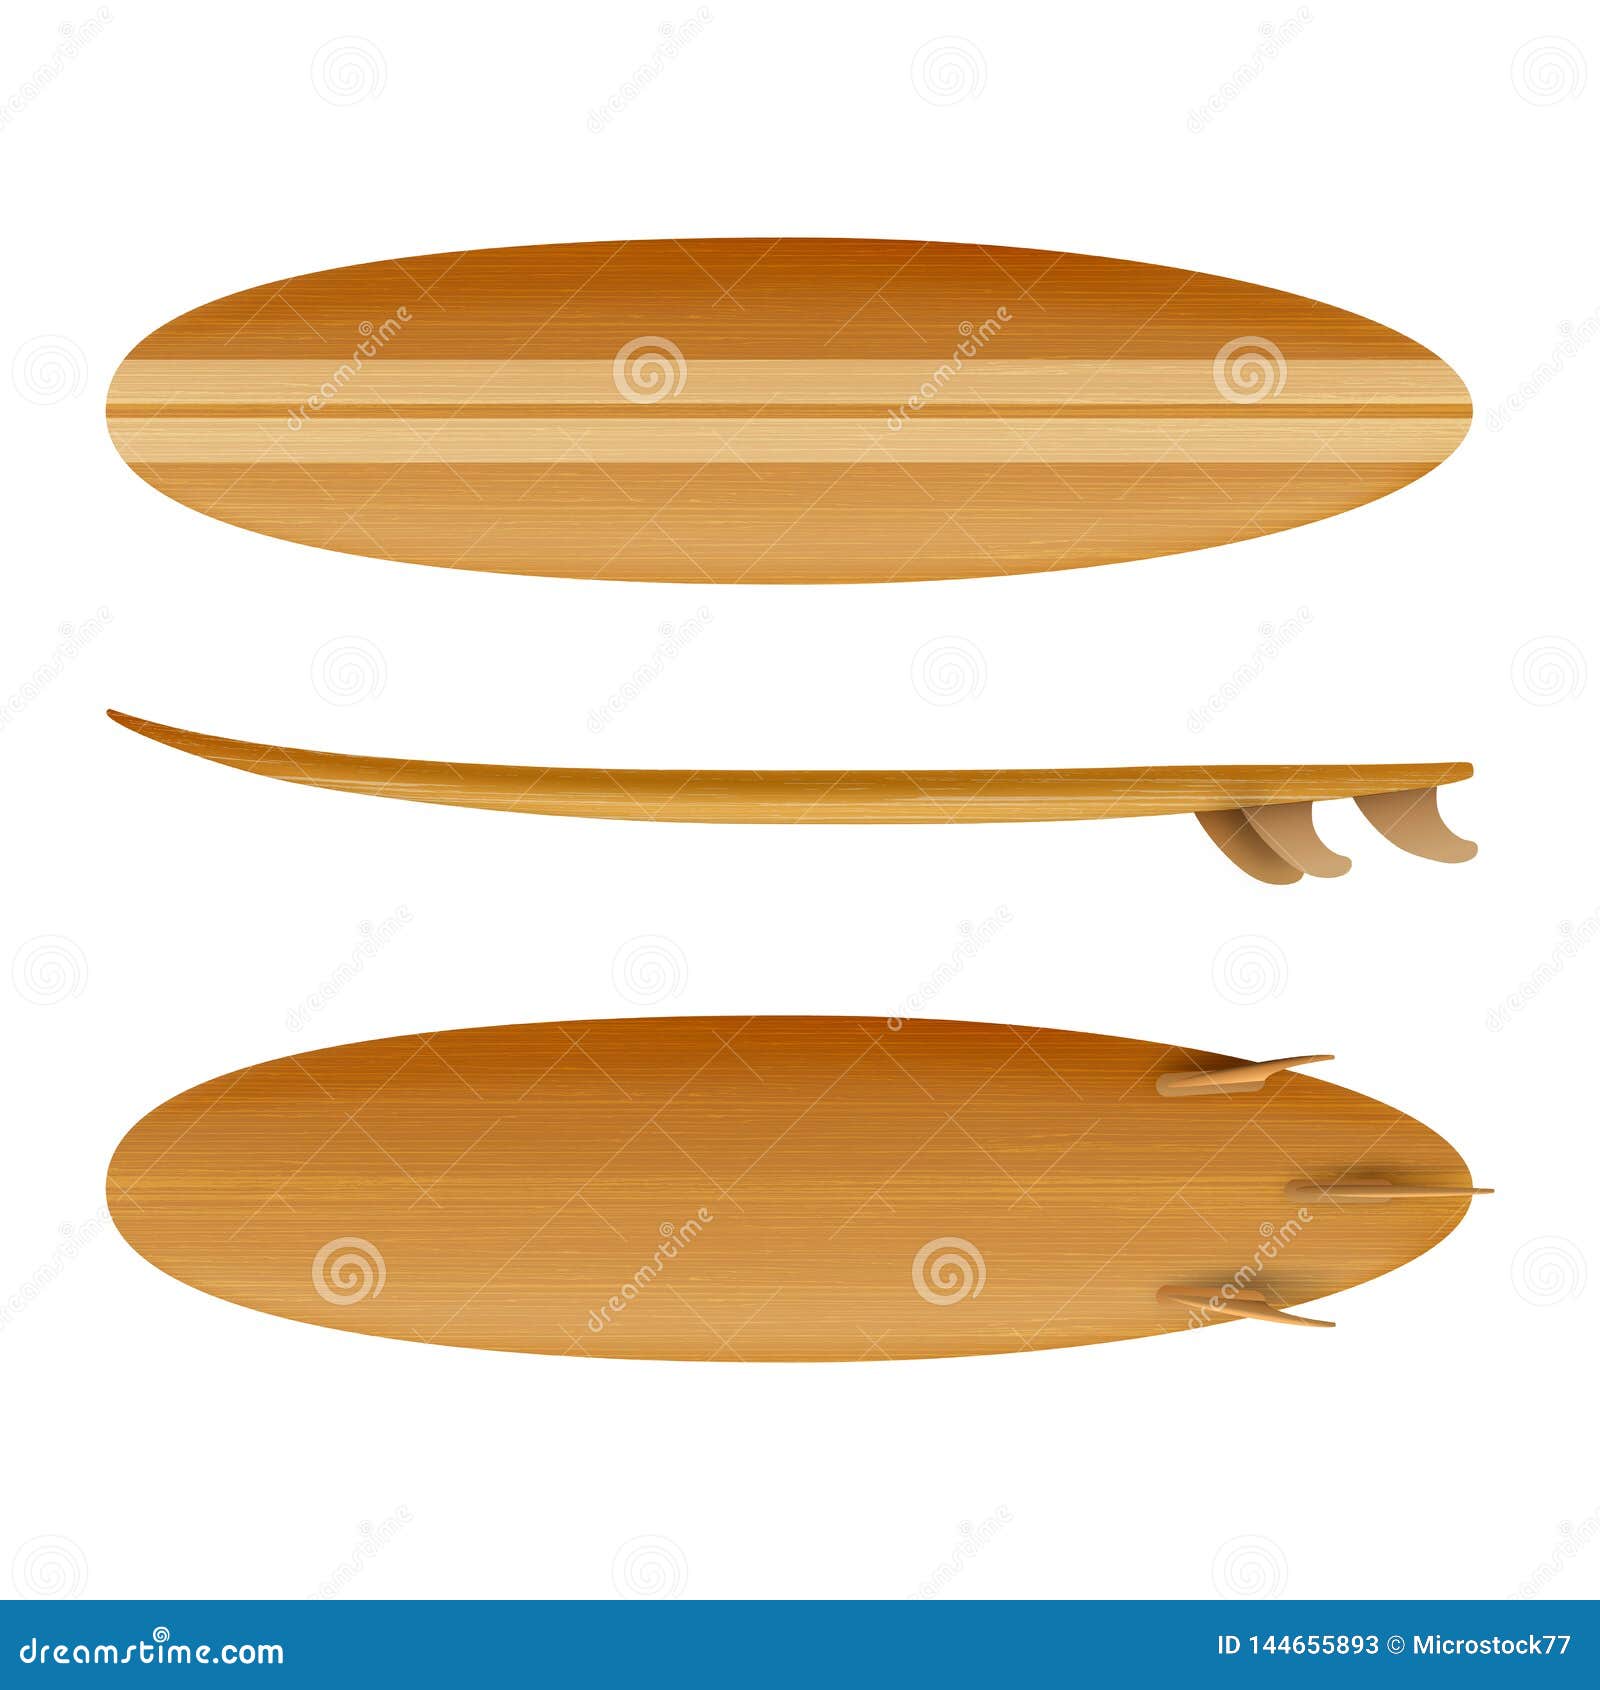 33+ Surfboard Longboard Mockup Front View Pictures ...